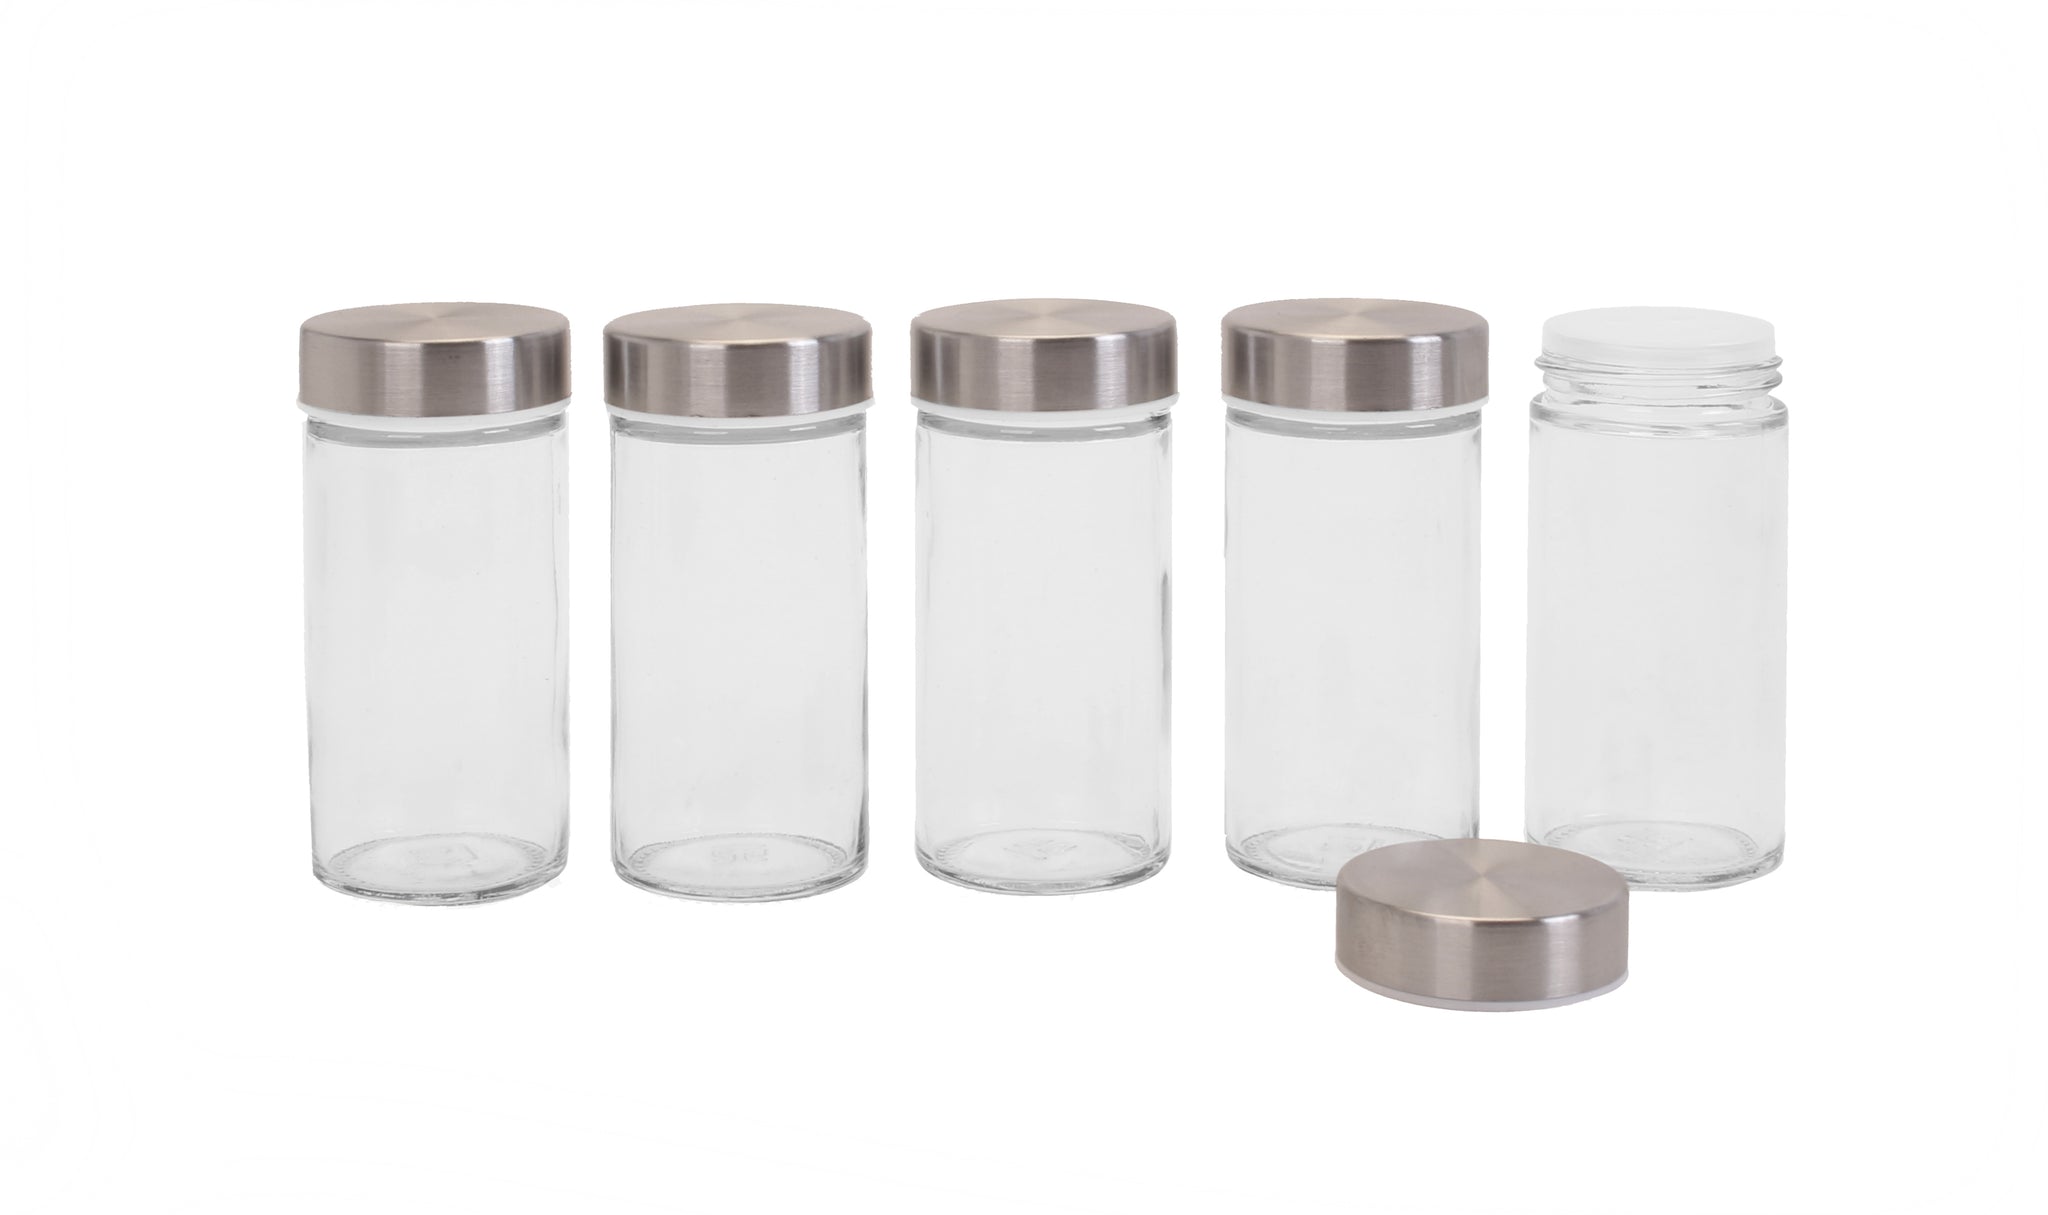 3pcs spice jars with spoon and tray Price N13,000